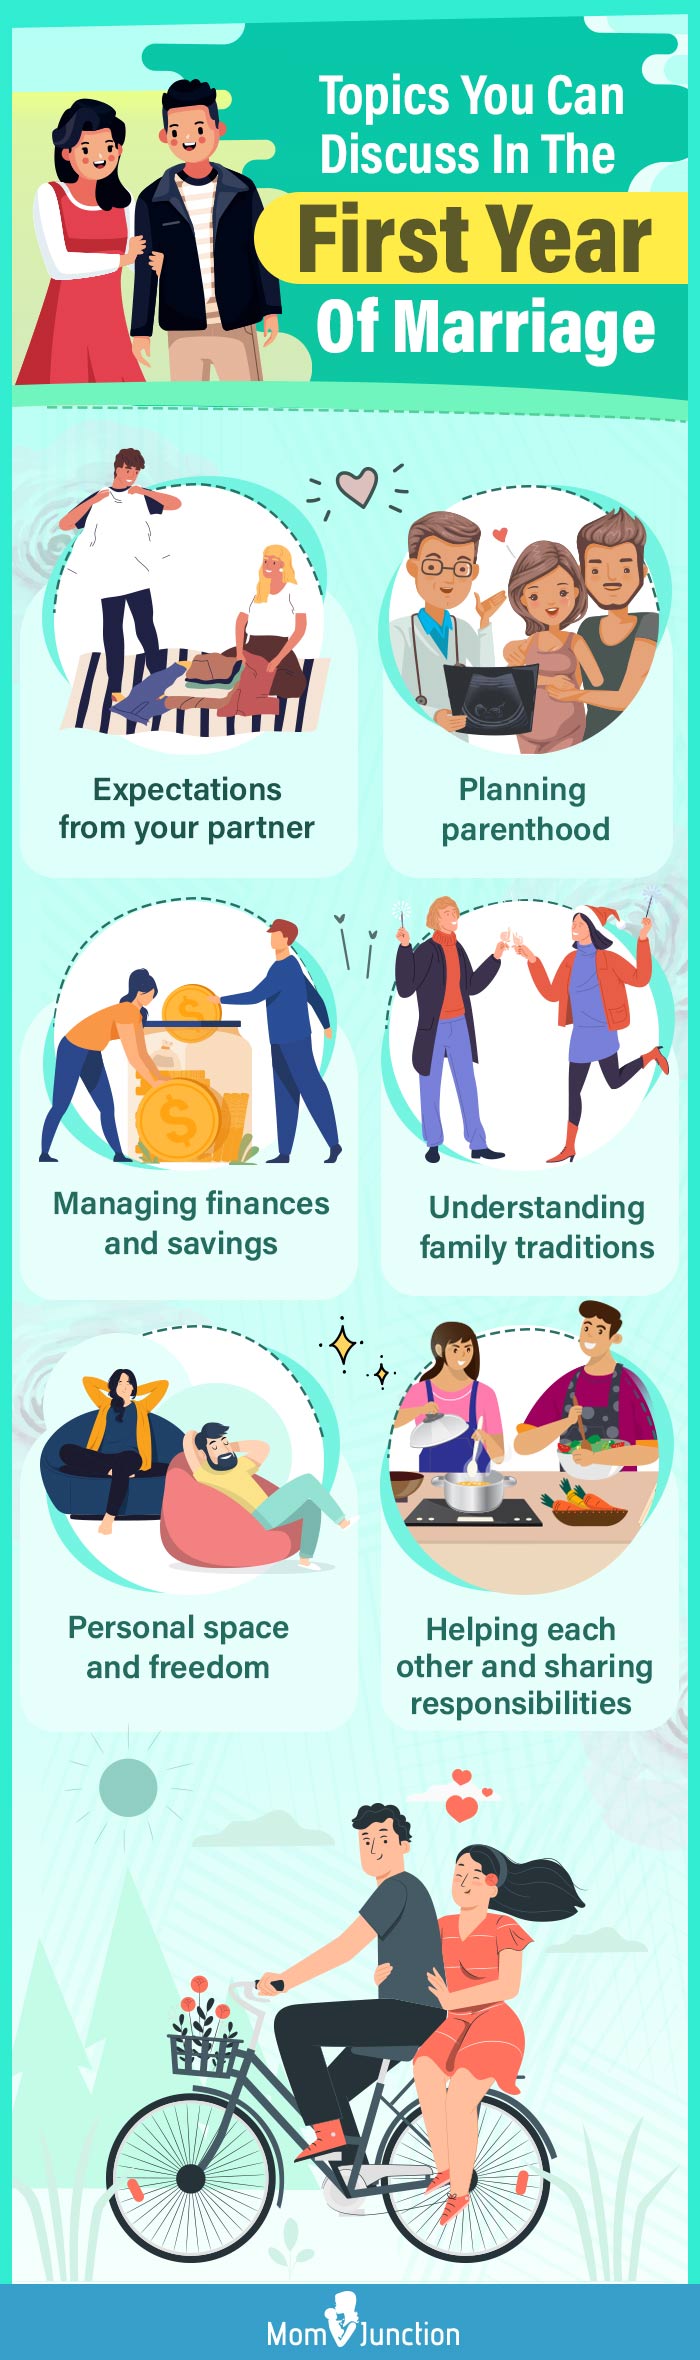 topics you can discuss in the first year of marriage [infographic]